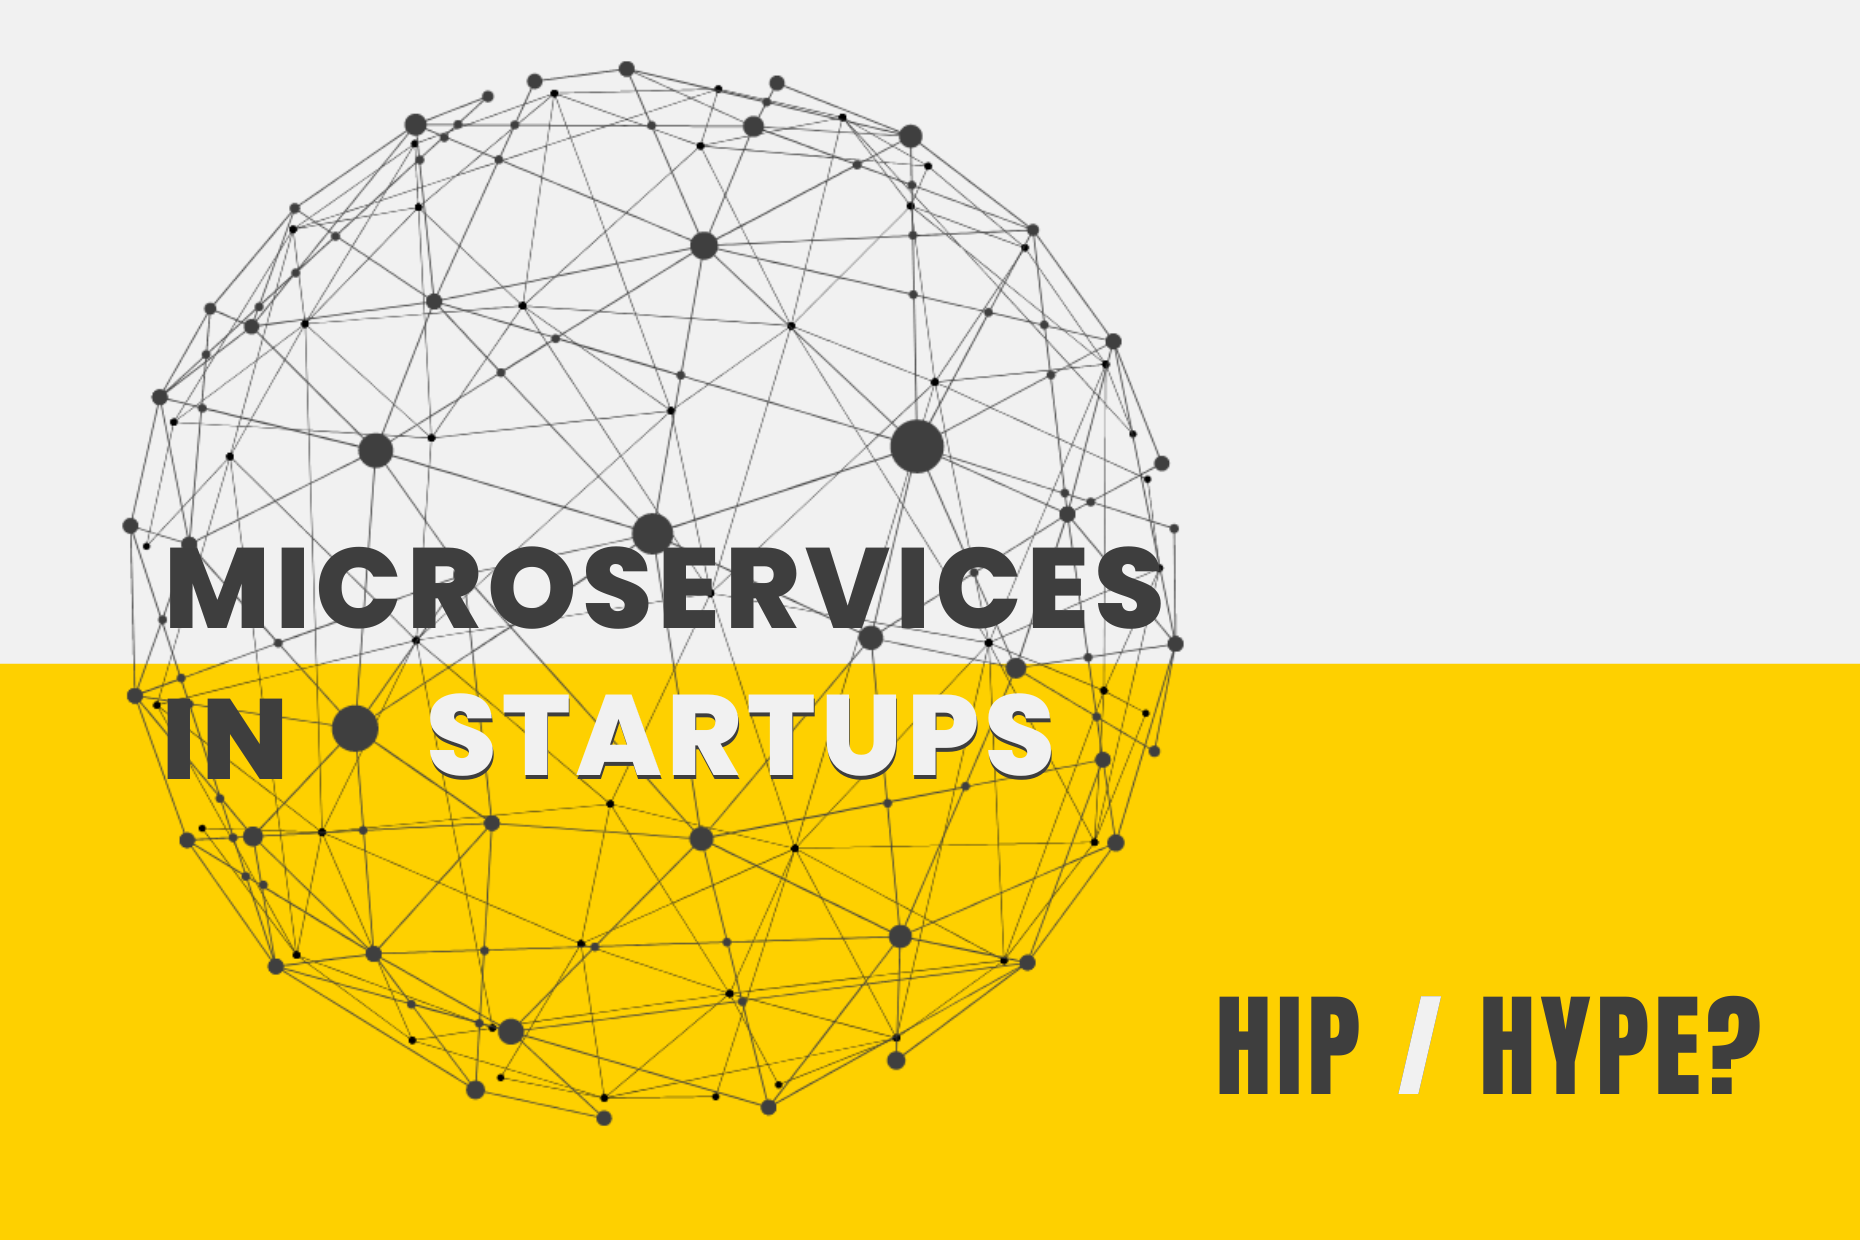 The Latest Microservices in Startups Trends: Hip or Hype?